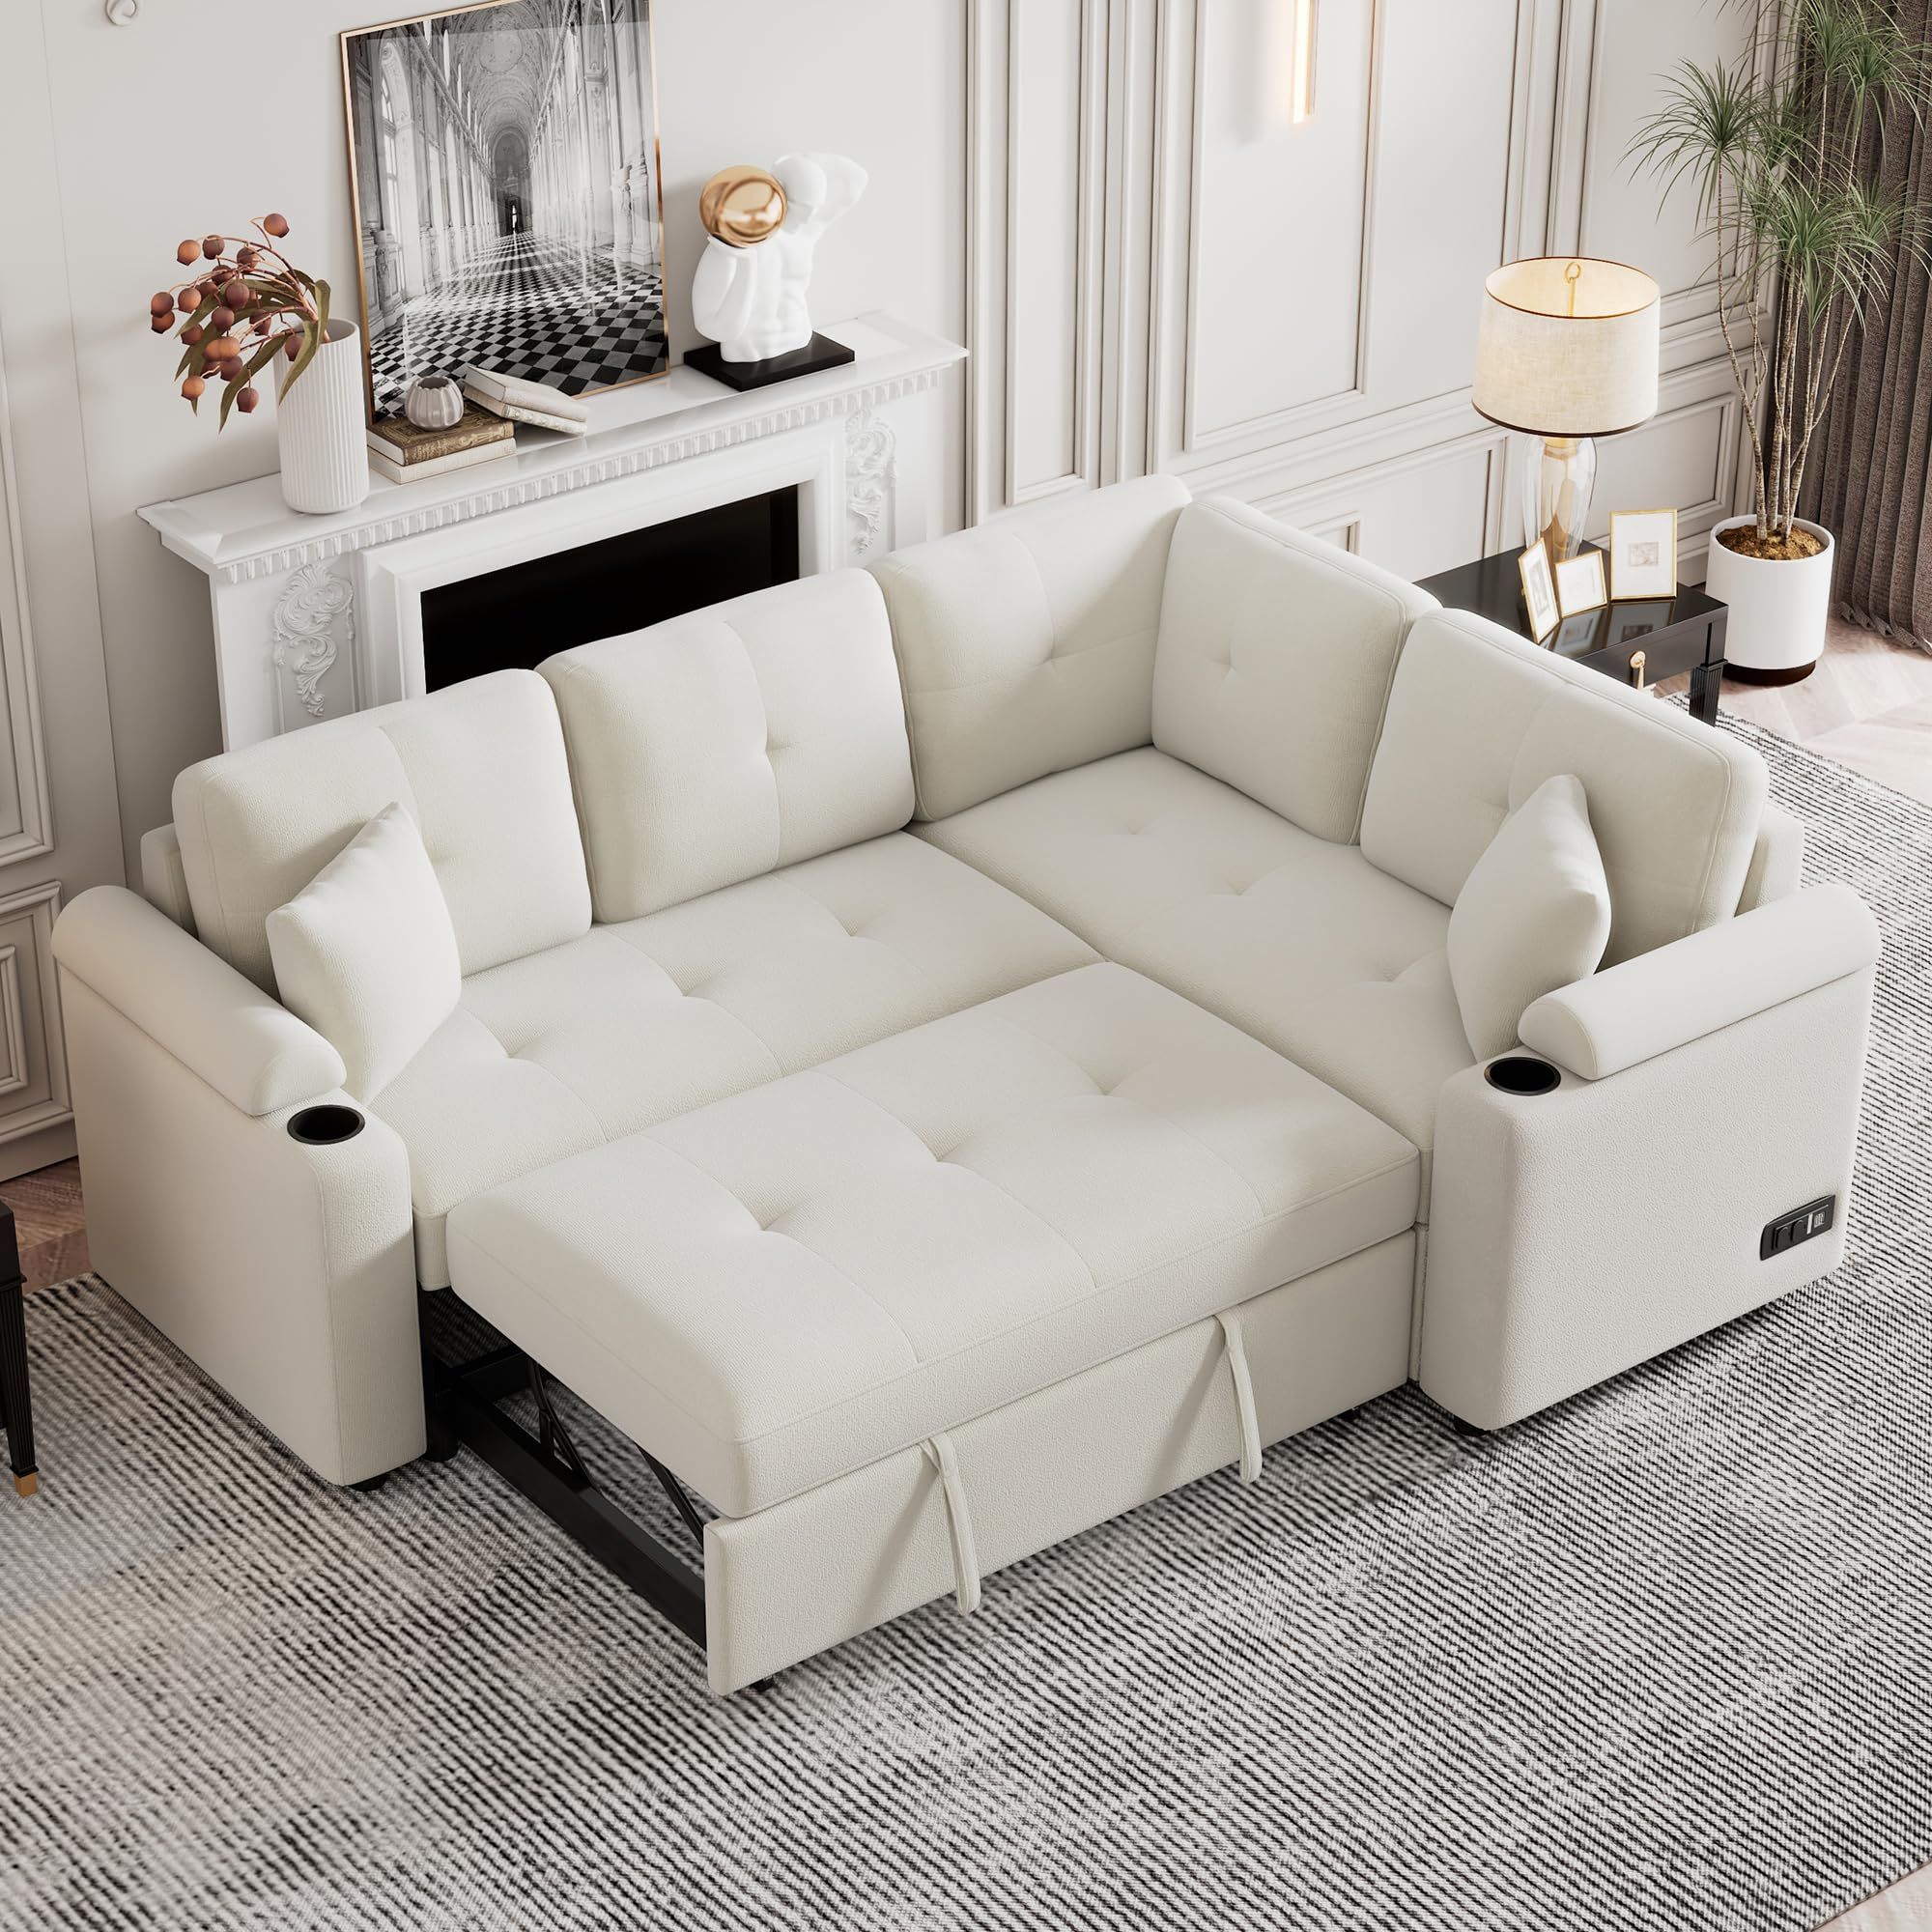 Comfortable and Convenient: The Versatility of Sofa Sleepers